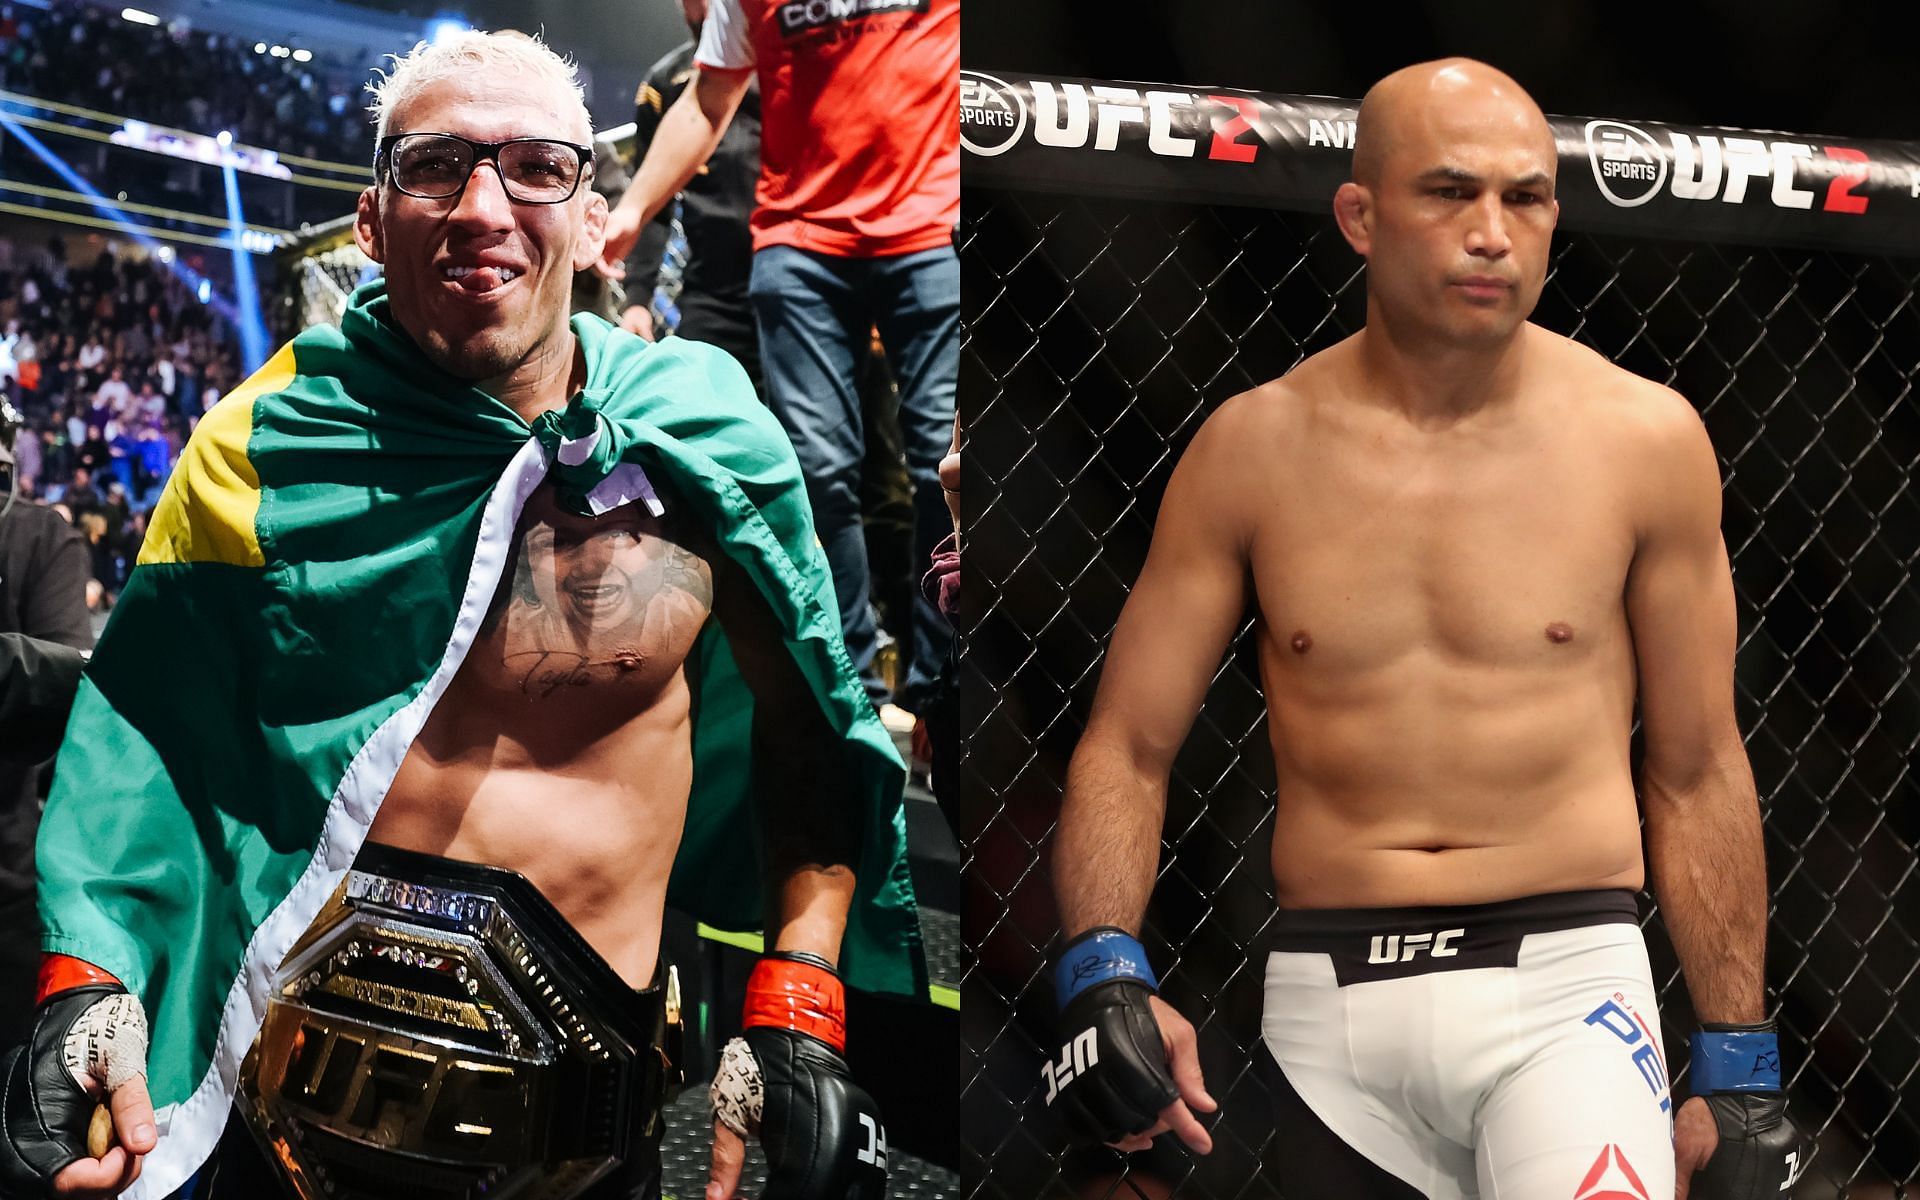 Current and former UFC lightweight champions Charles Oliveira (left) and B.J. Penn (right), respectively